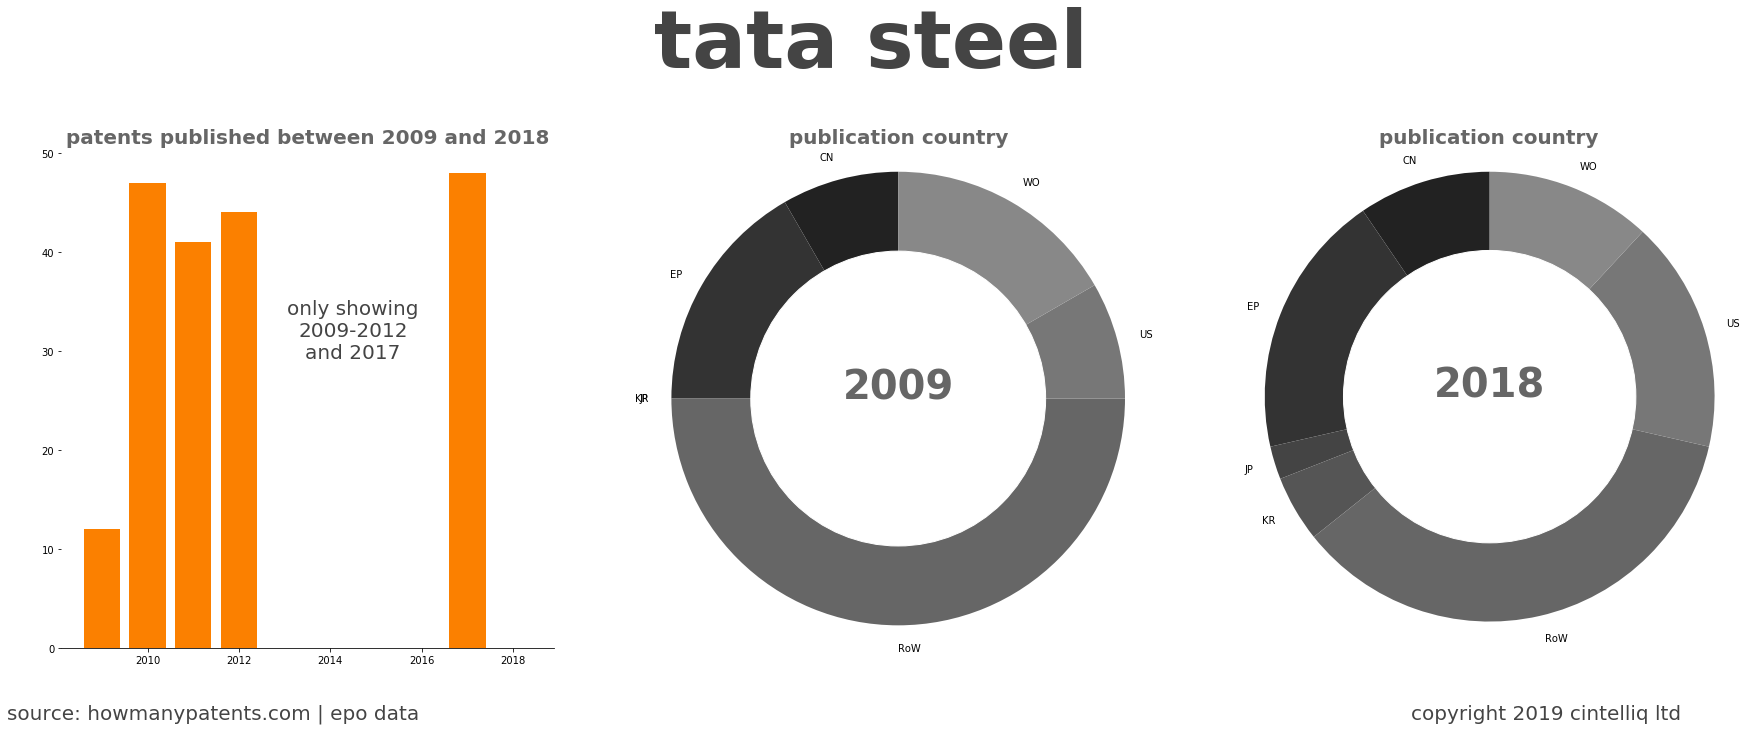 summary of patents for Tata Steel